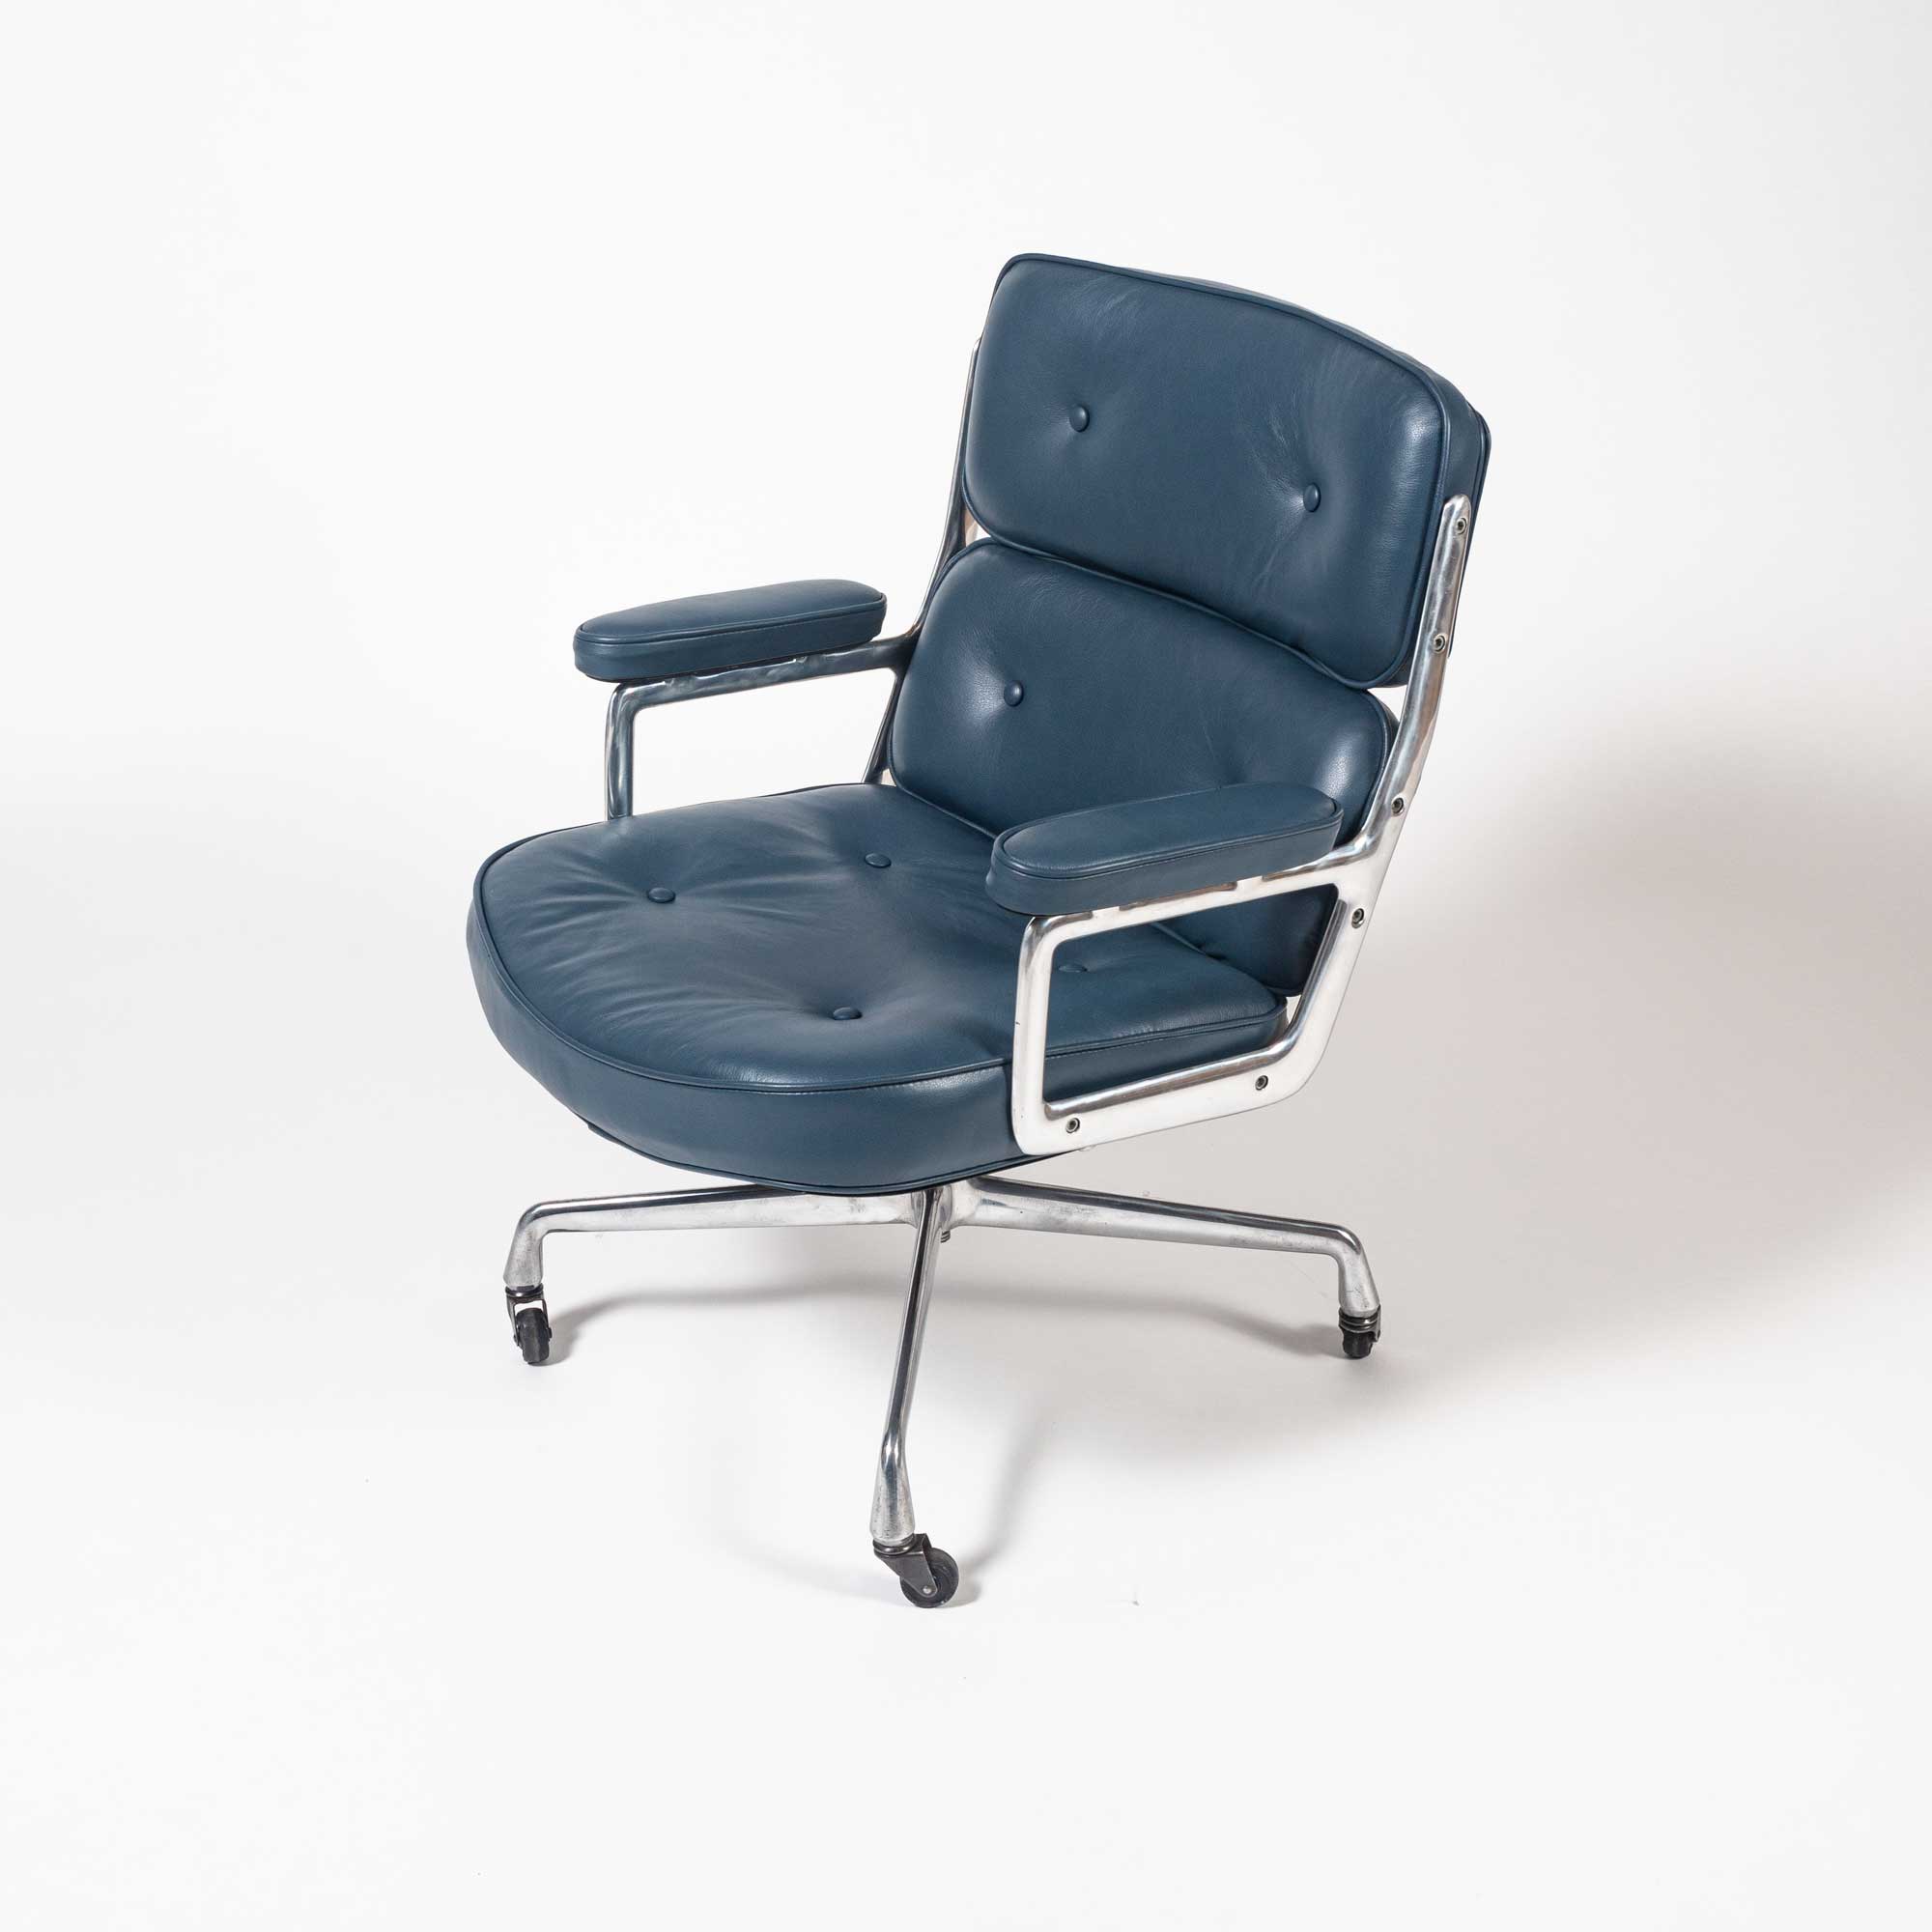 Custom Order: Custom Order First Gen Eames Time Life Lobby Chair in Green Leather